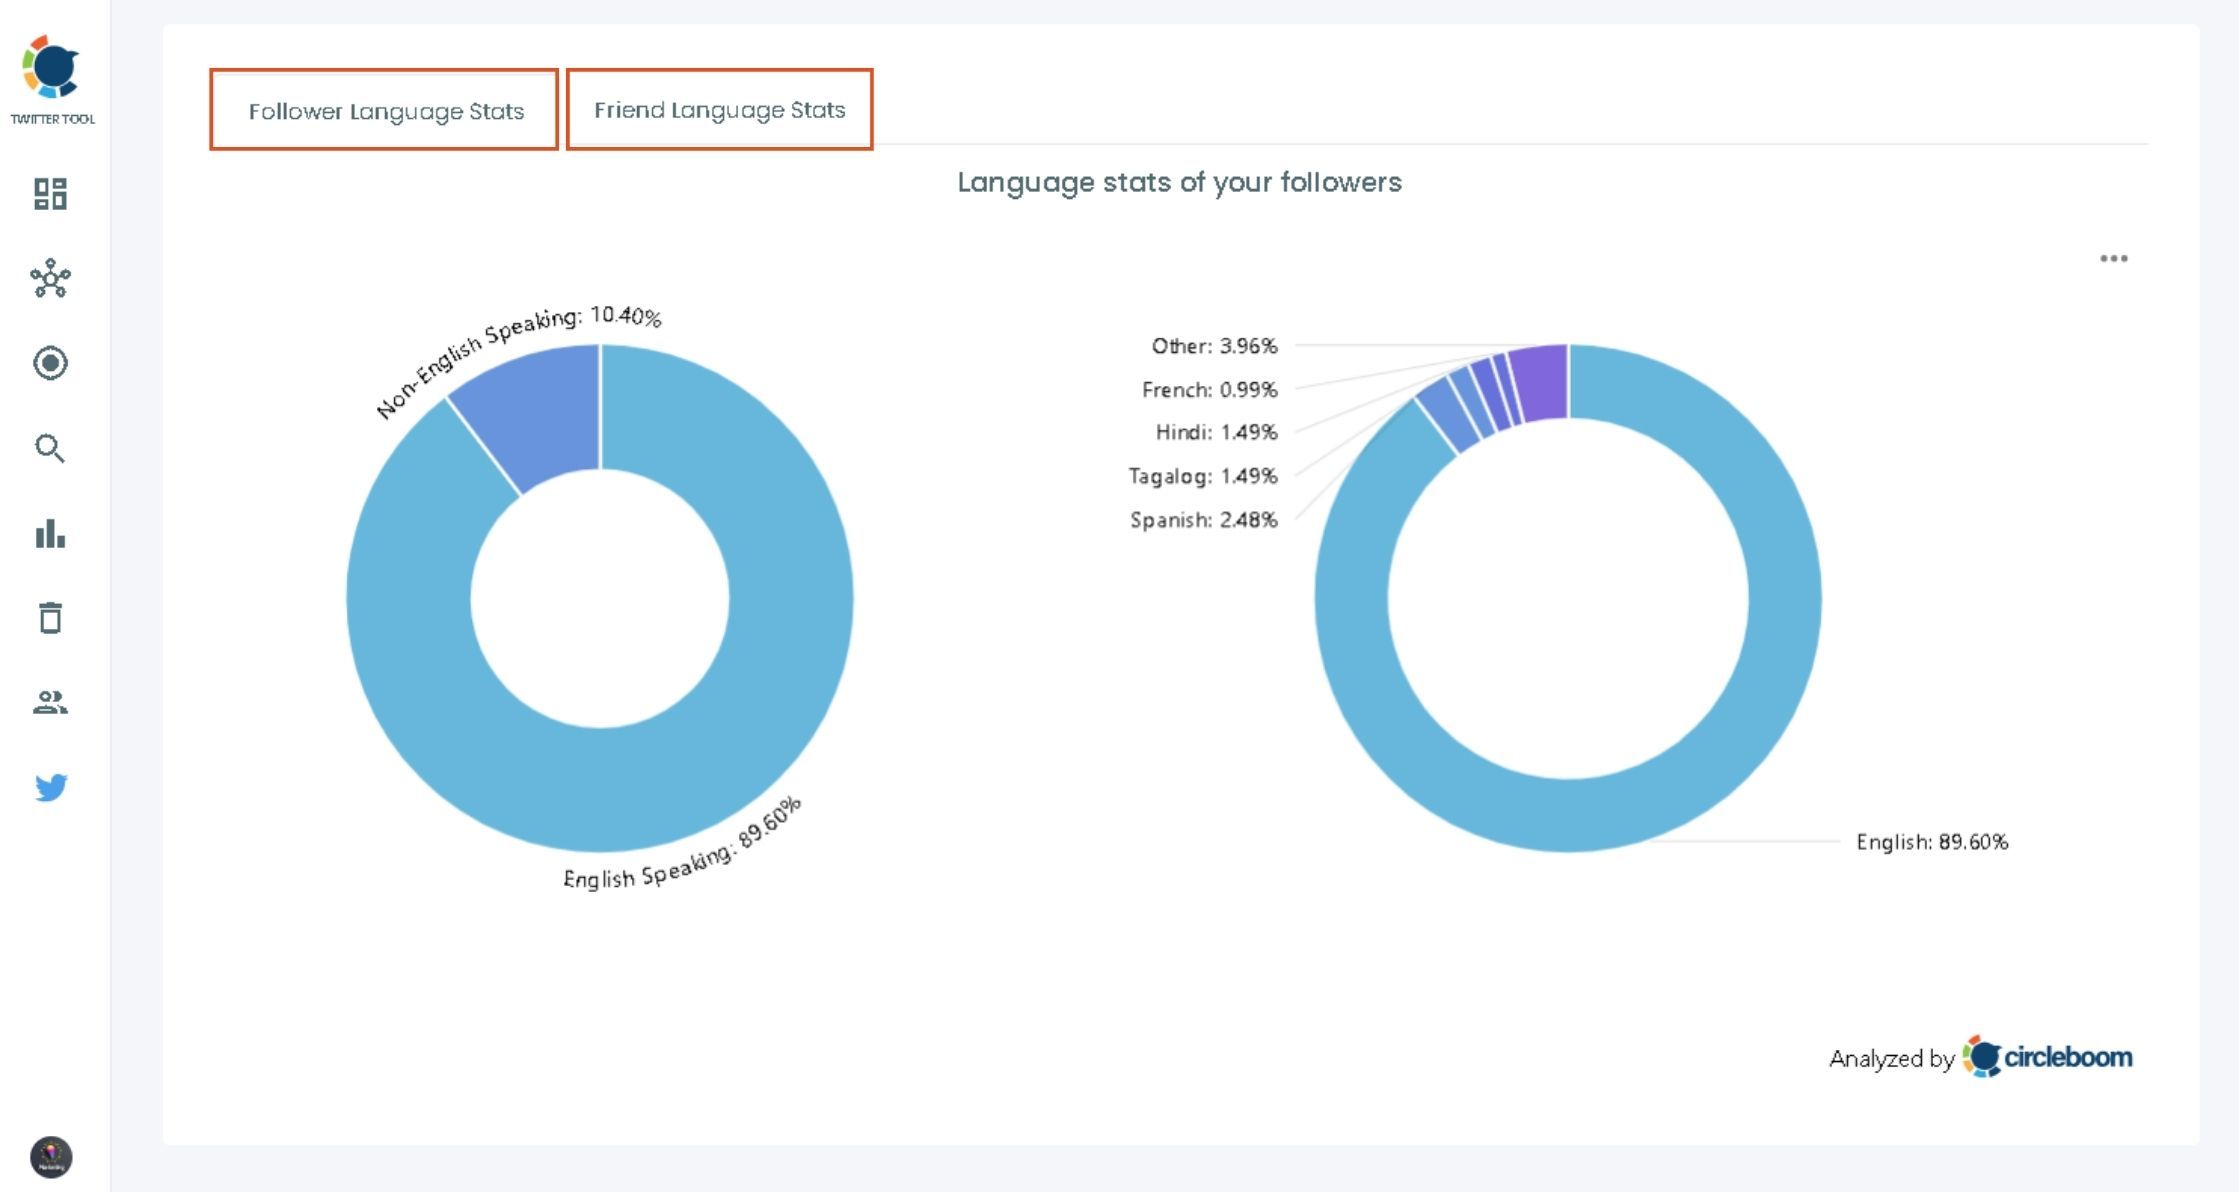 Get the latest interests from Twitter via analysing your audience language stats on Twitter!